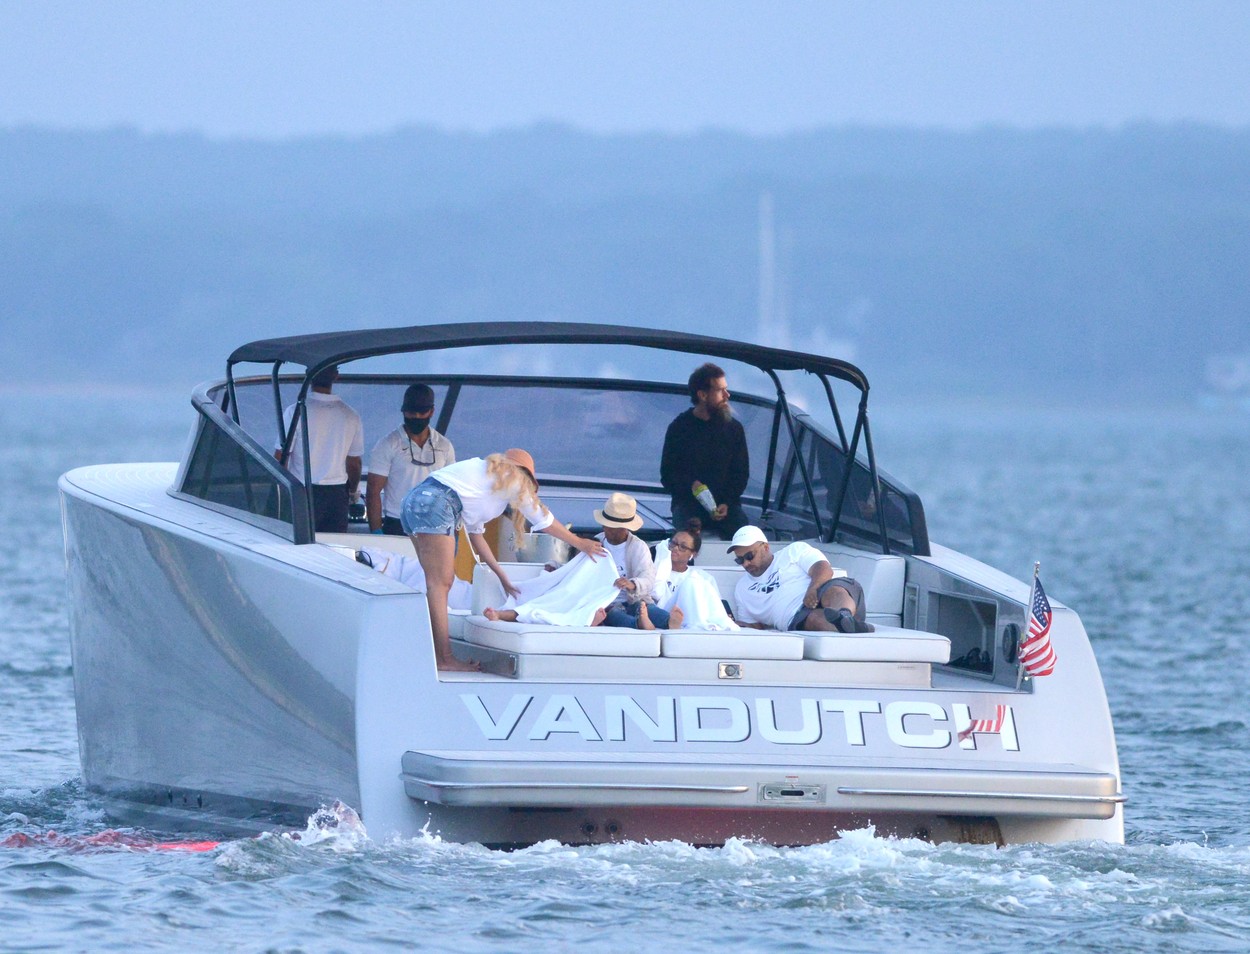 08/24/2020 PREMIUM EXCLUSIVE: Beyonce and Jay-Z head out on a luxury boat ride with Twitter CEO Jack Dorsey in The Hamptons. The rapper and the social media mogul were pictured relaxing and sipping on rose wine. Beyonce was dressed in a pink bucket hat, white blouse, and jean shorts.,Image: 555108717, License: Rights-managed, Restrictions: Exclusive NO usage without agreed price and terms. Please contact sales@theimagedirect.com, Model Release: no, Credit line: TheImageDirect.com / The Image Direct / Profimedia